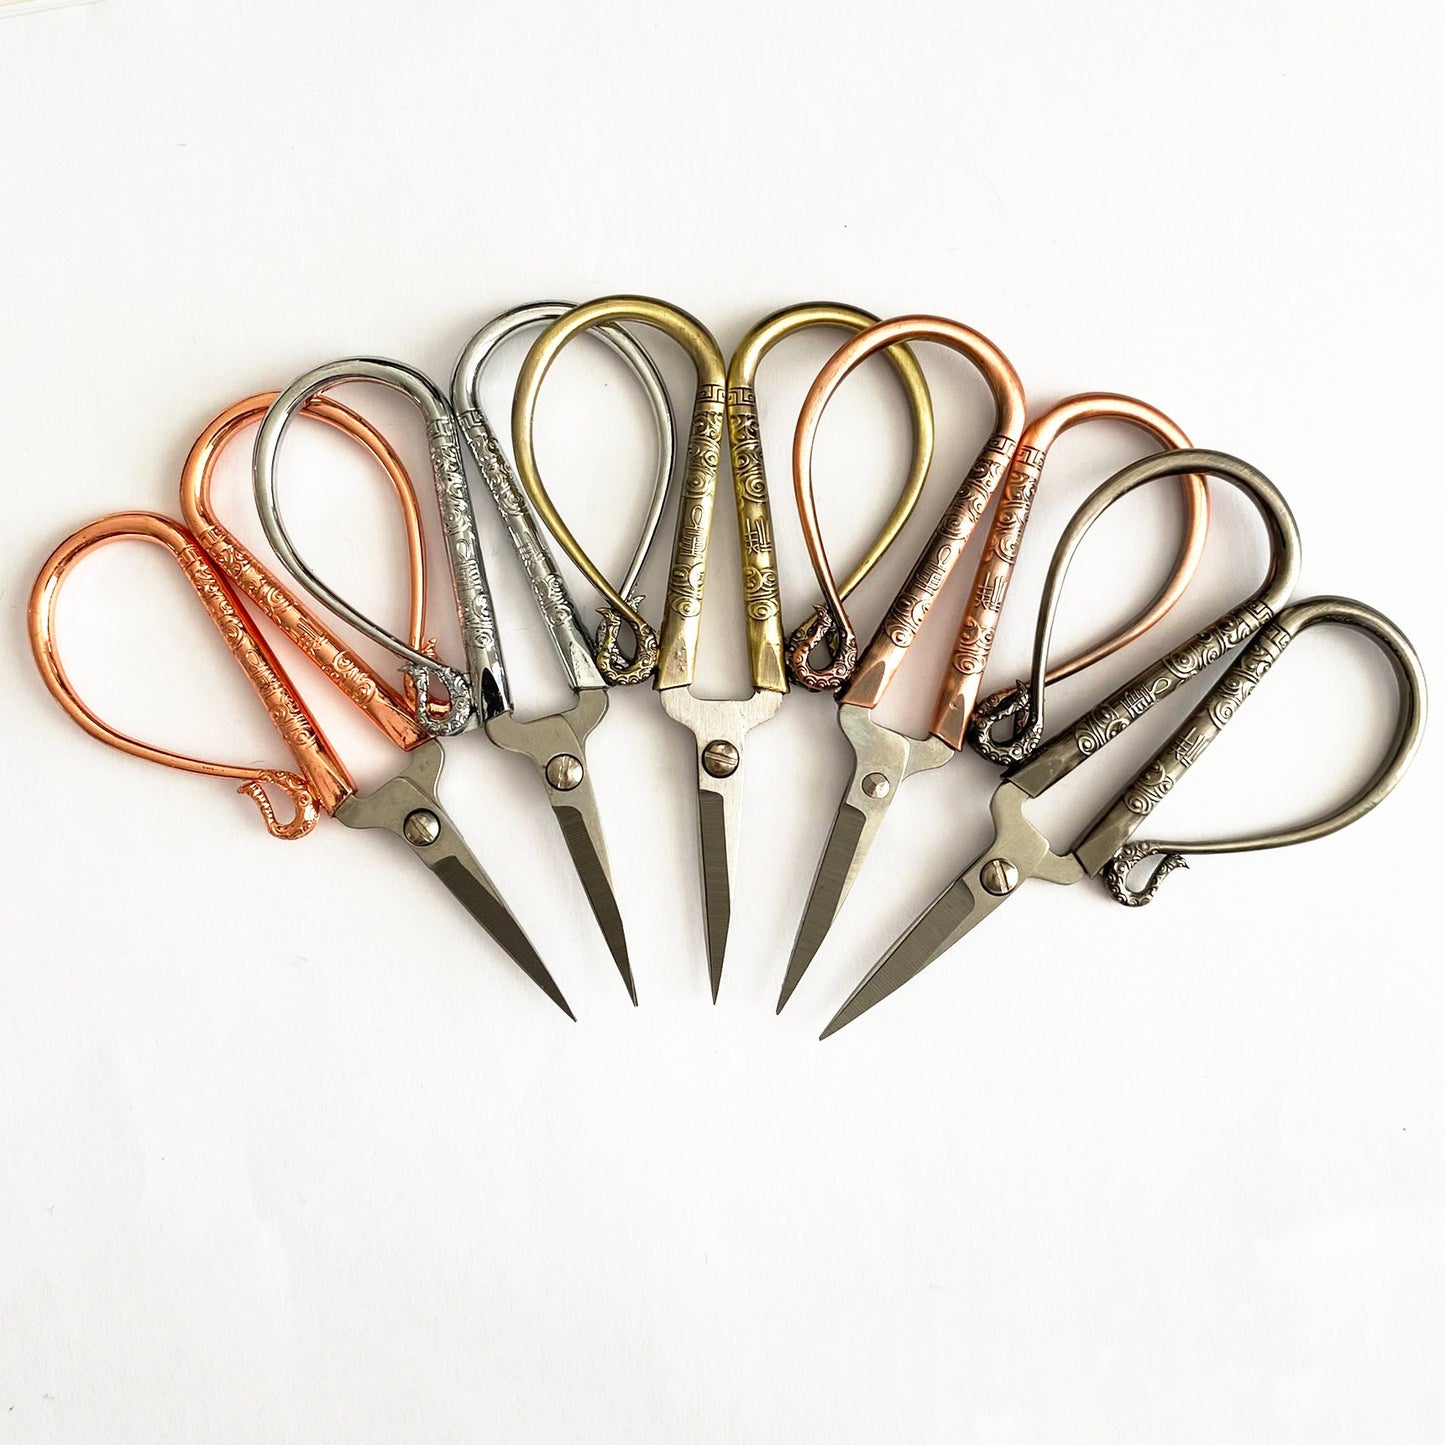 Pretty Needlework Scissors | Embroidery Quilting Craft Manicure Vintage Style | Rose Gold Gold Silver Gunmetal Grey